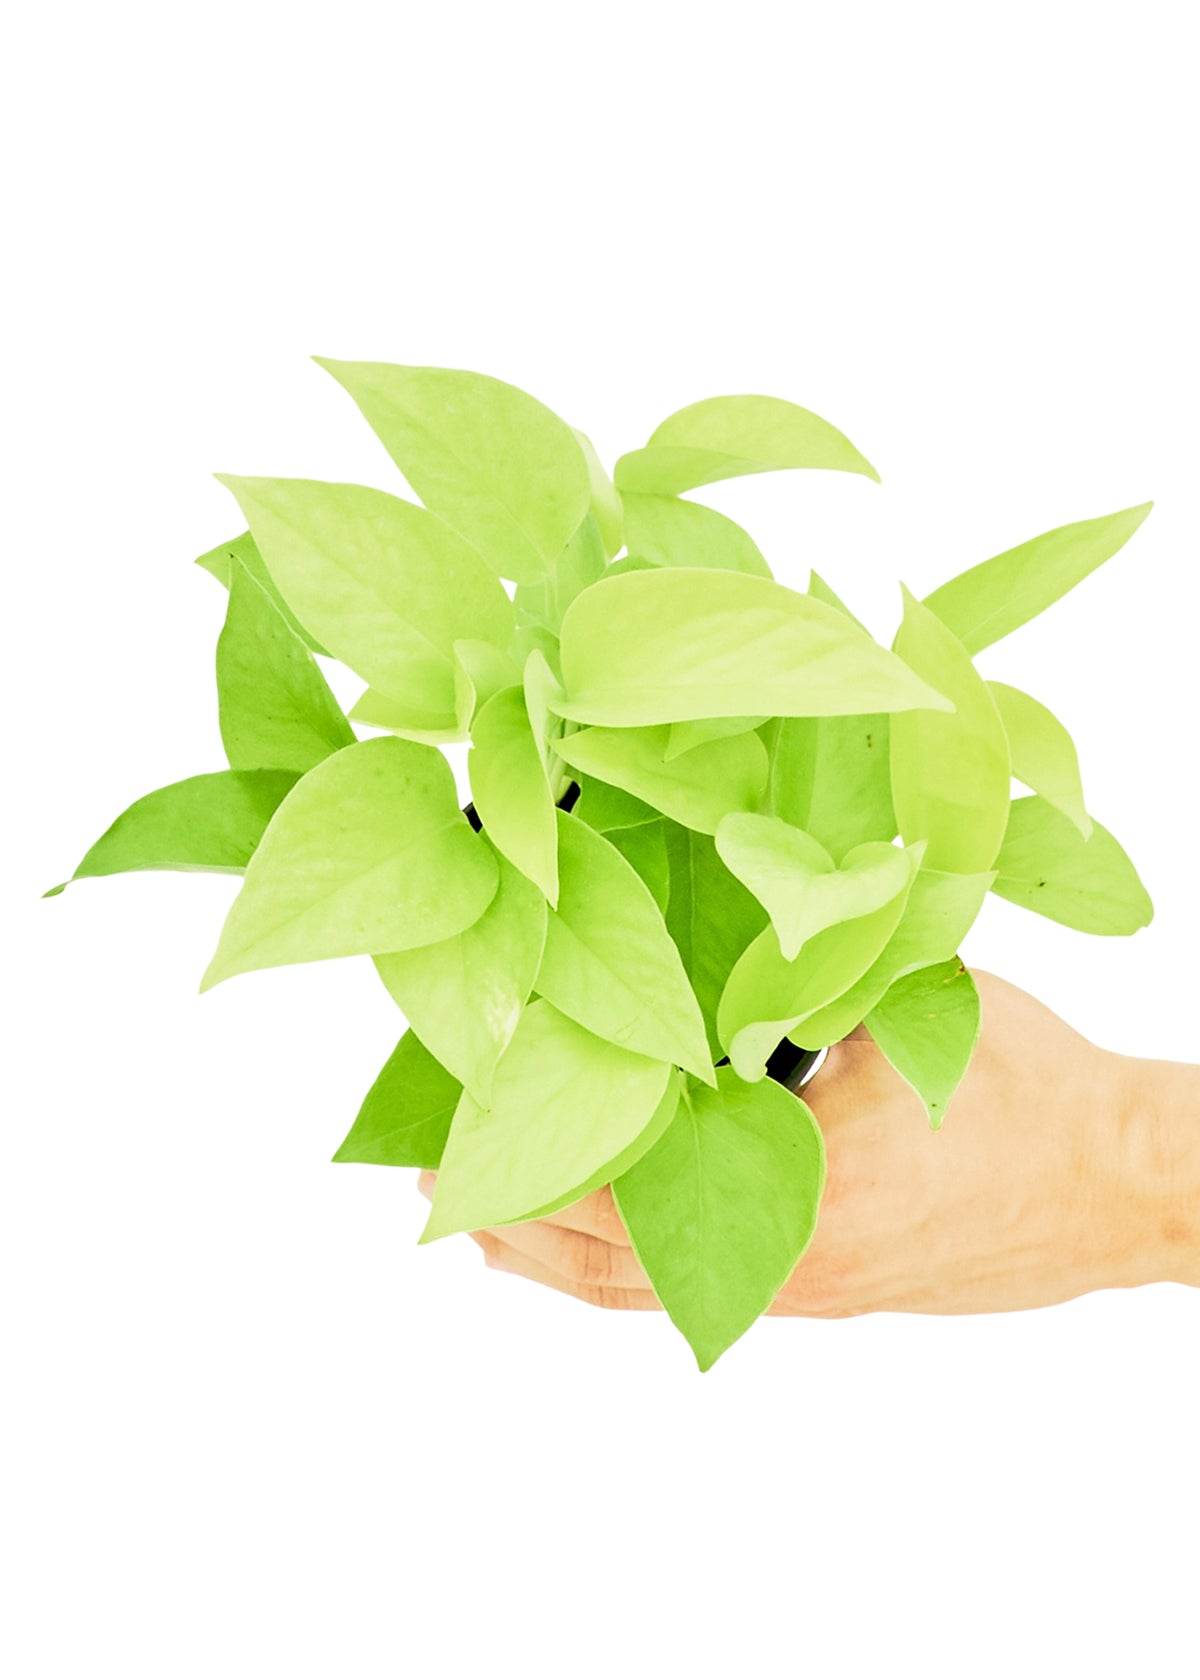 Small size Neon Pothos plant in a growers pot with a white background and a hand holding the pot to show the top view